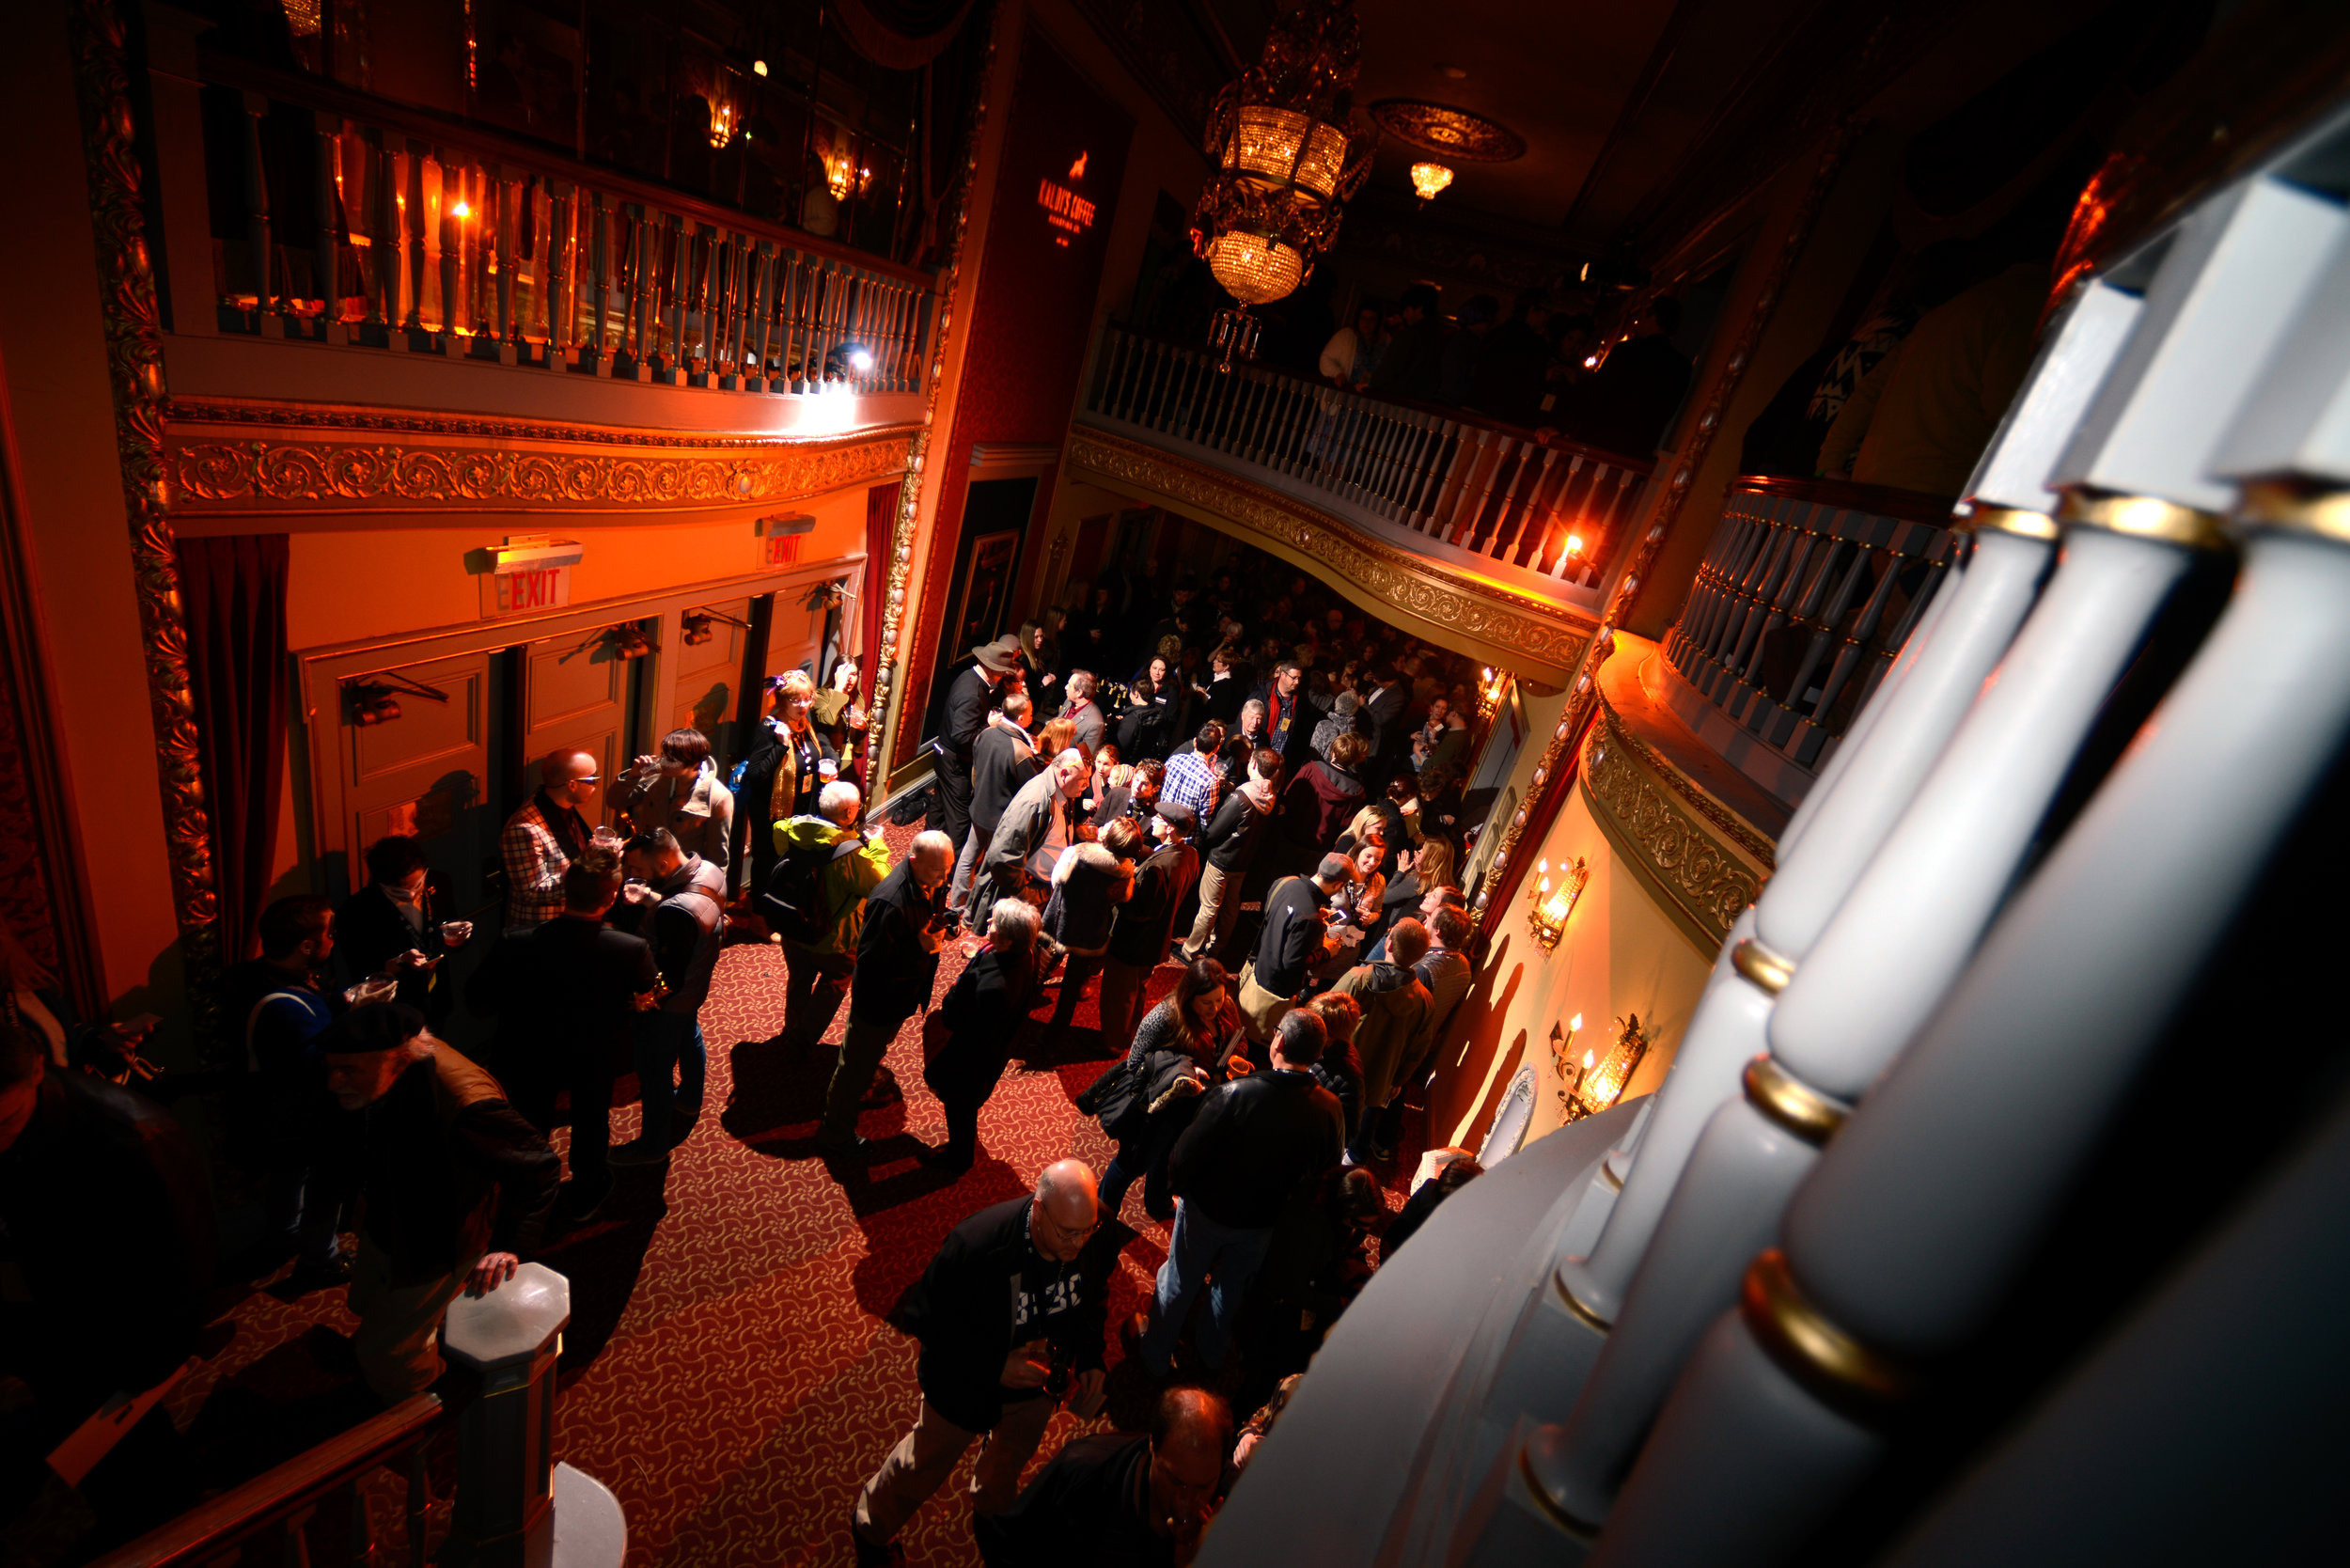  Crowds mingle during the True/False Jubilee masquerade at the Missouri Theatre on Thursday, March 3, 2016, in Columbia, MO. The idea for the festival began in 2003, and attendance exceeded 49,500 that year. 